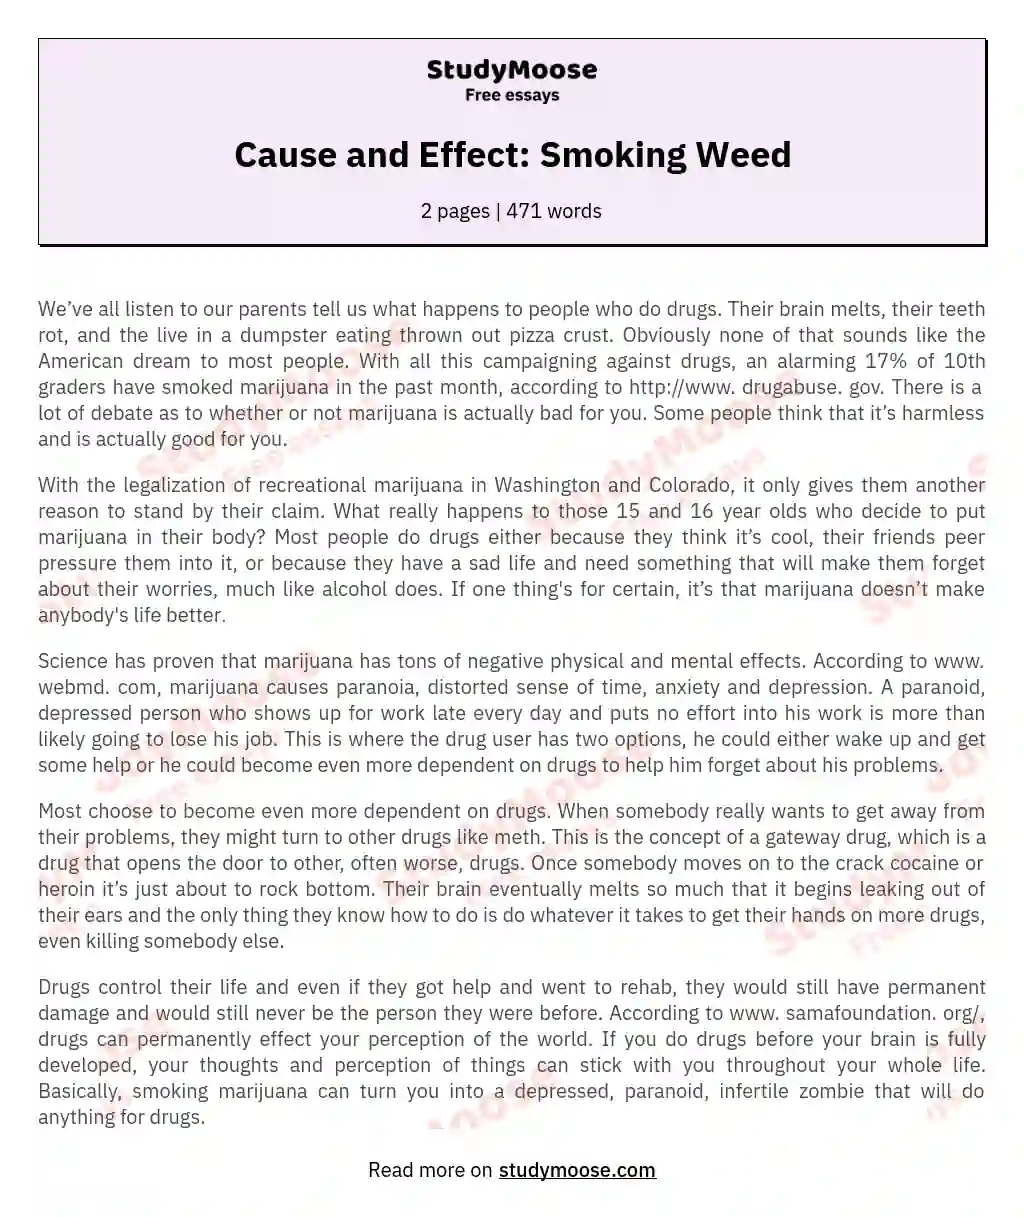 Cause and Effect: Smoking Weed